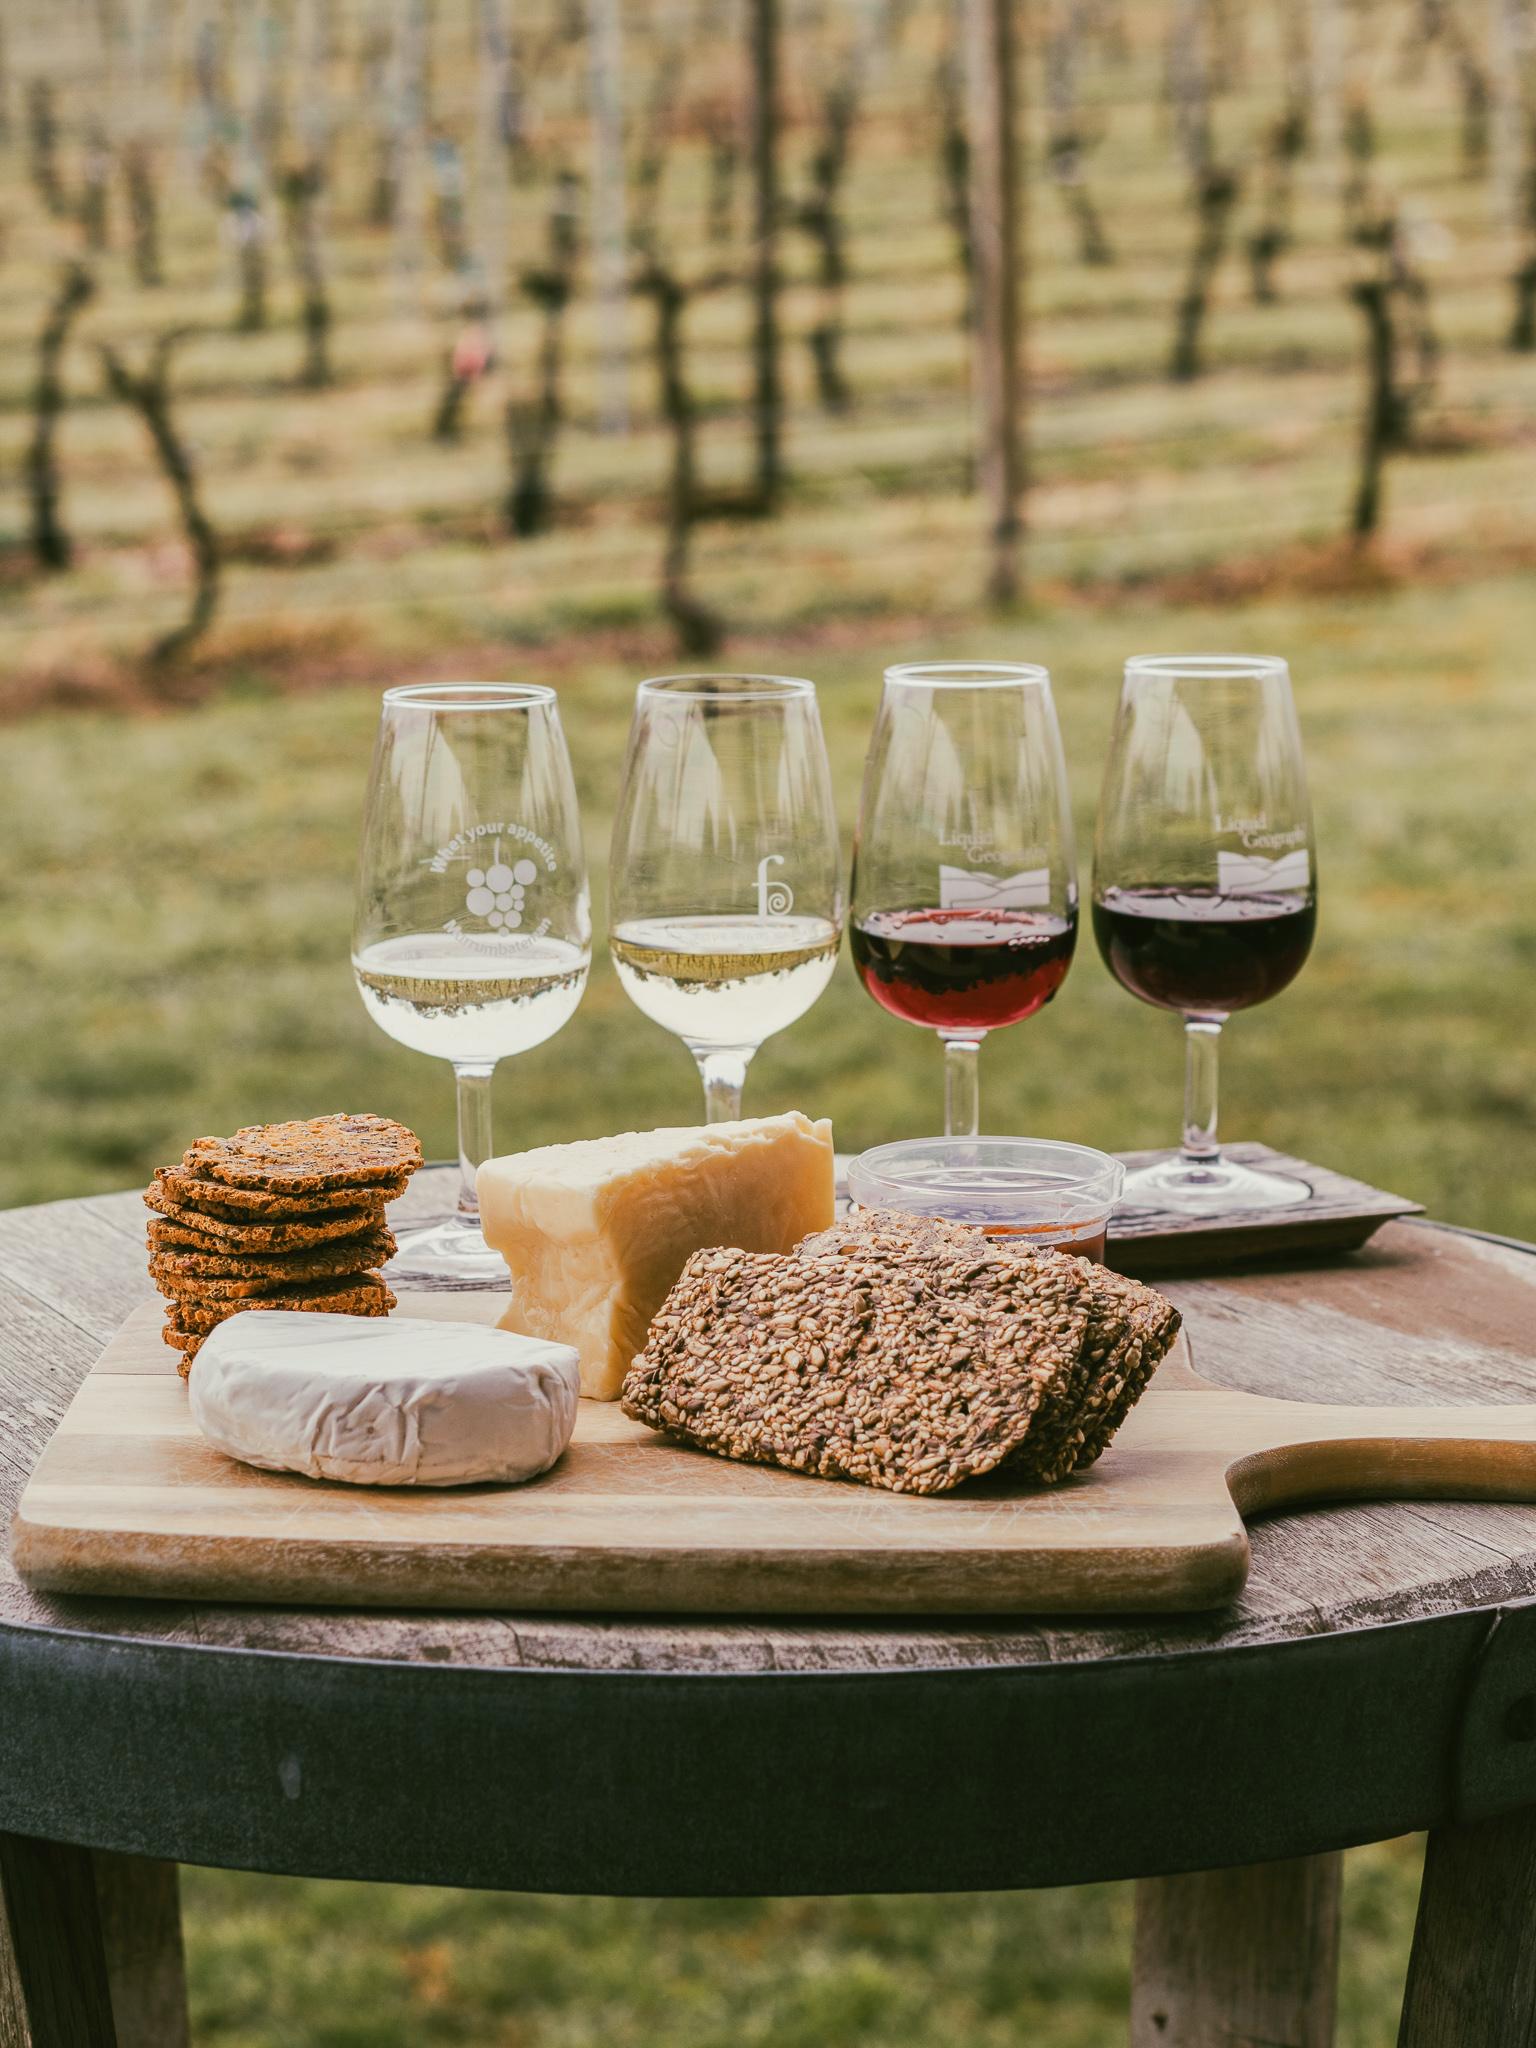 four glasses of wine on a wooden table with crackers and cheese on a grassy meadow